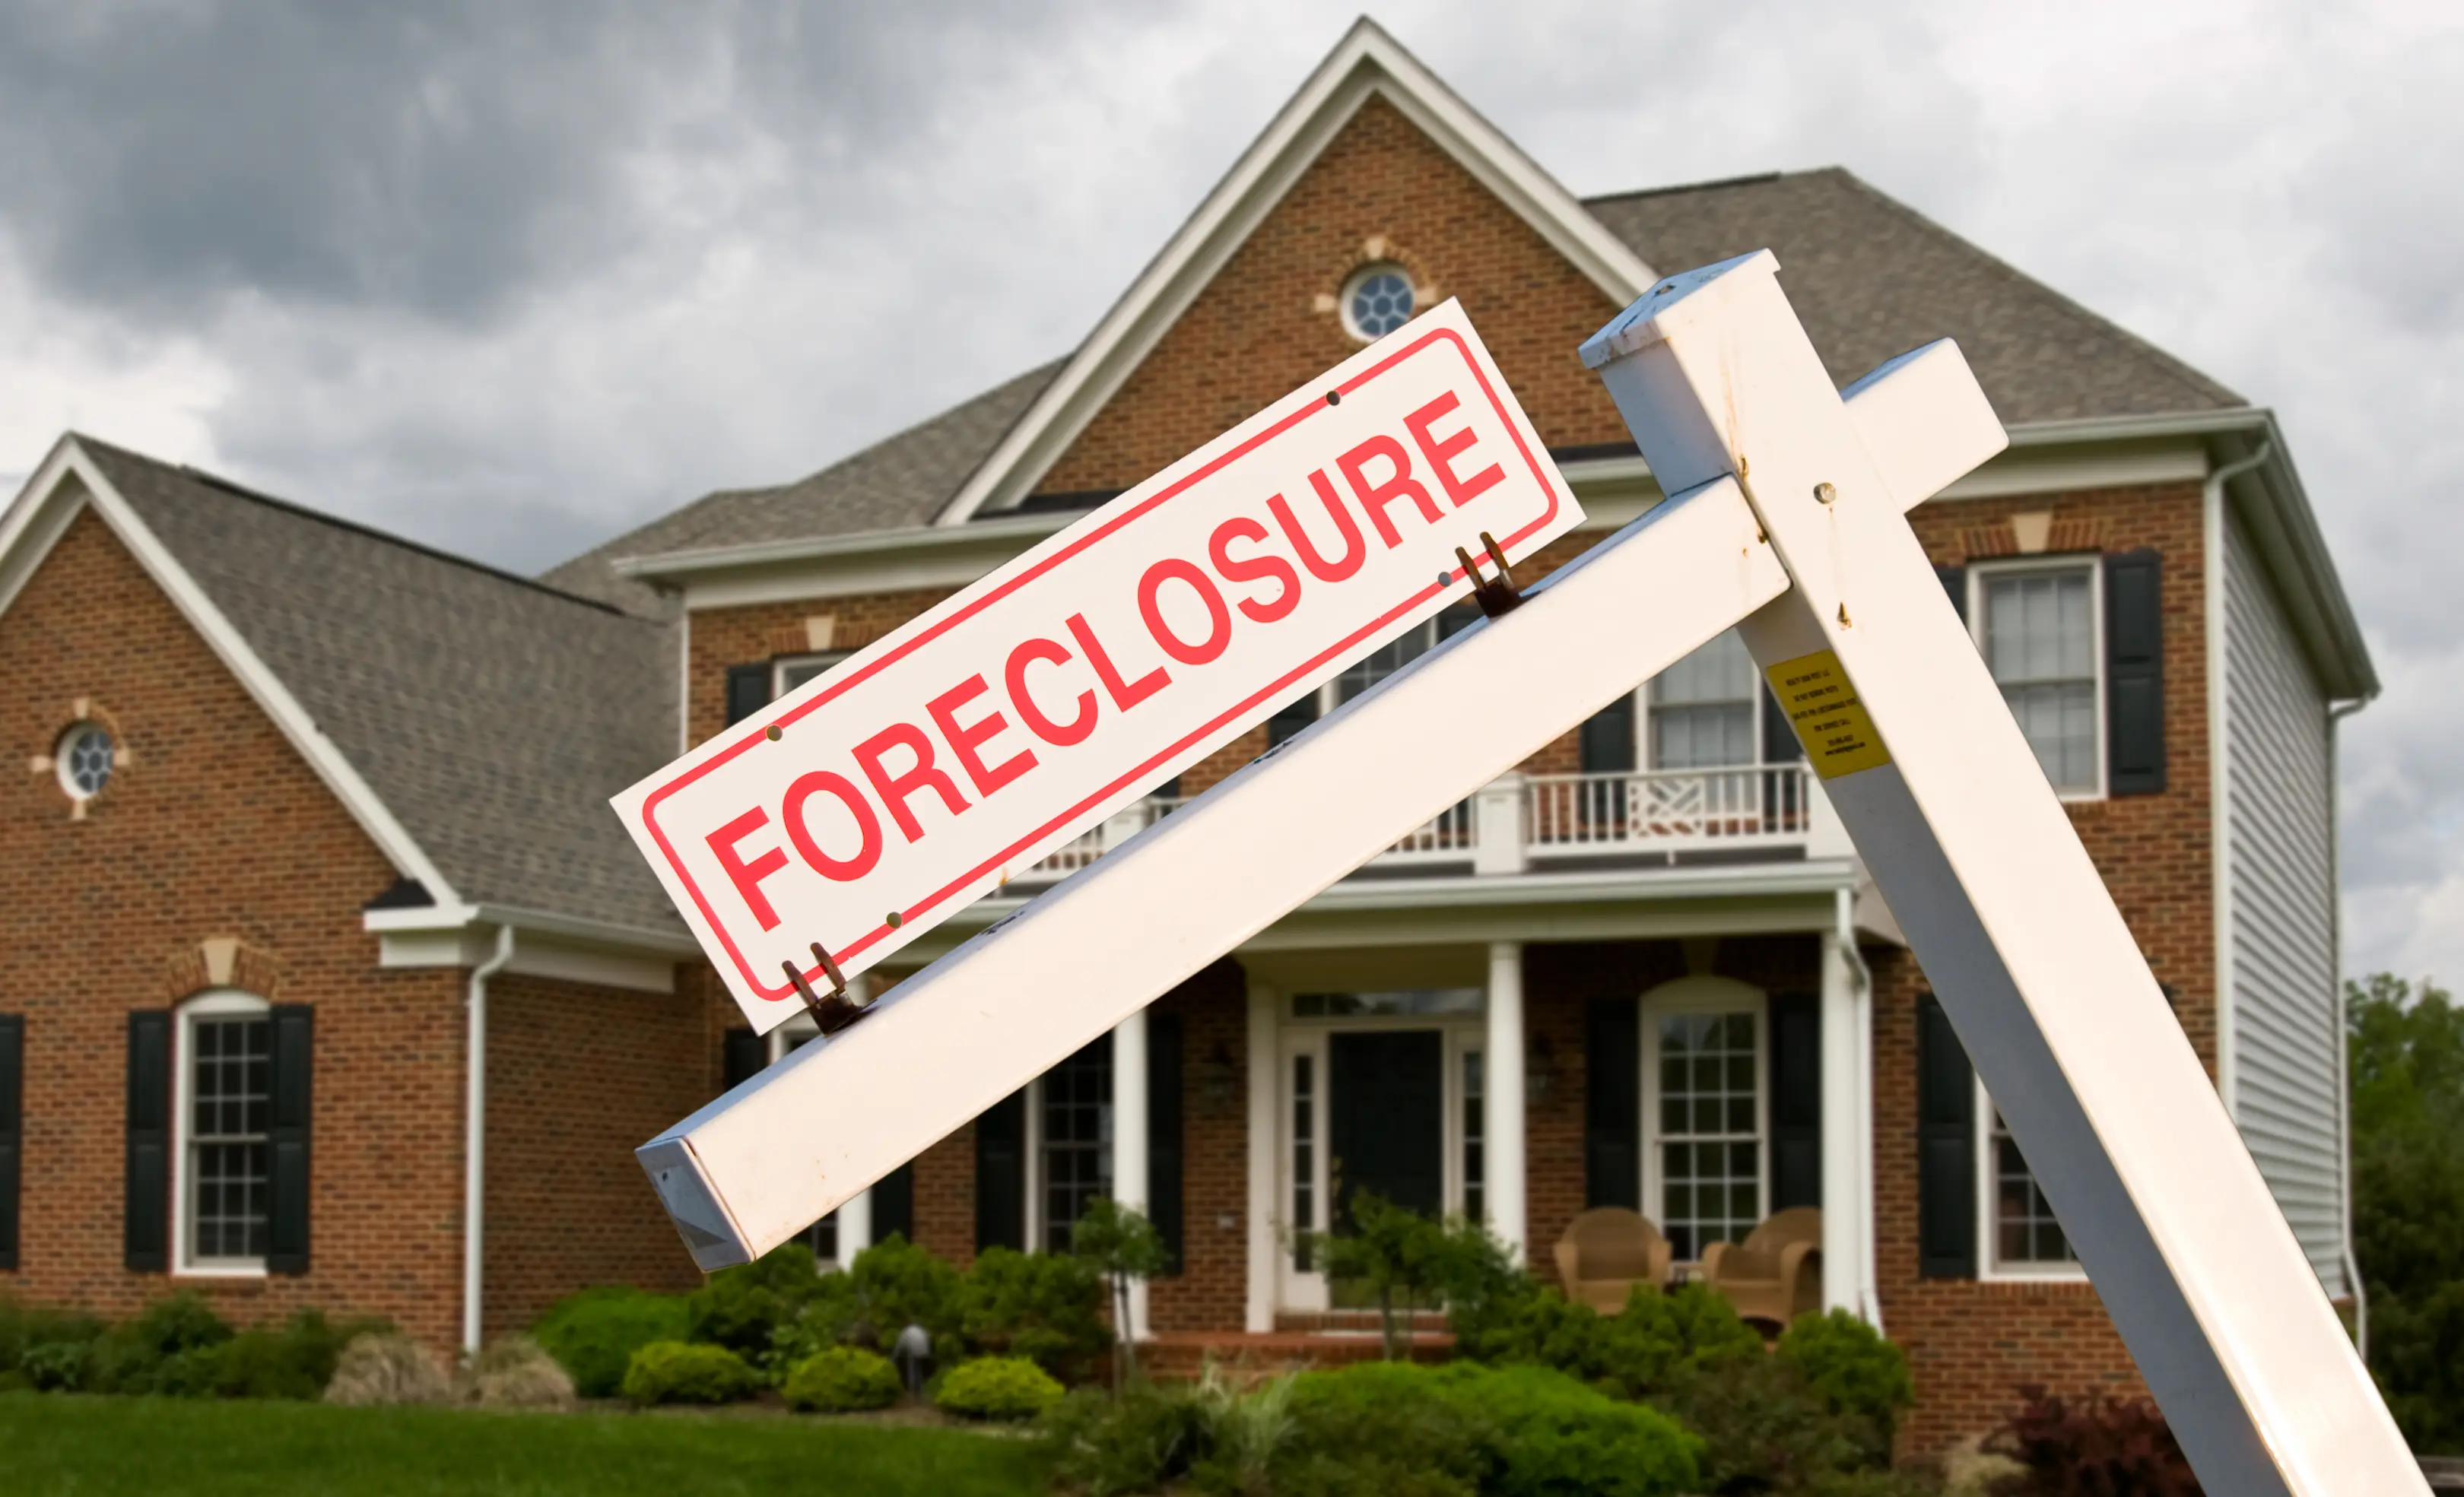 What_Should_I_Know_Before_Buying_a_Foreclosure_-_Thumbnail.webp